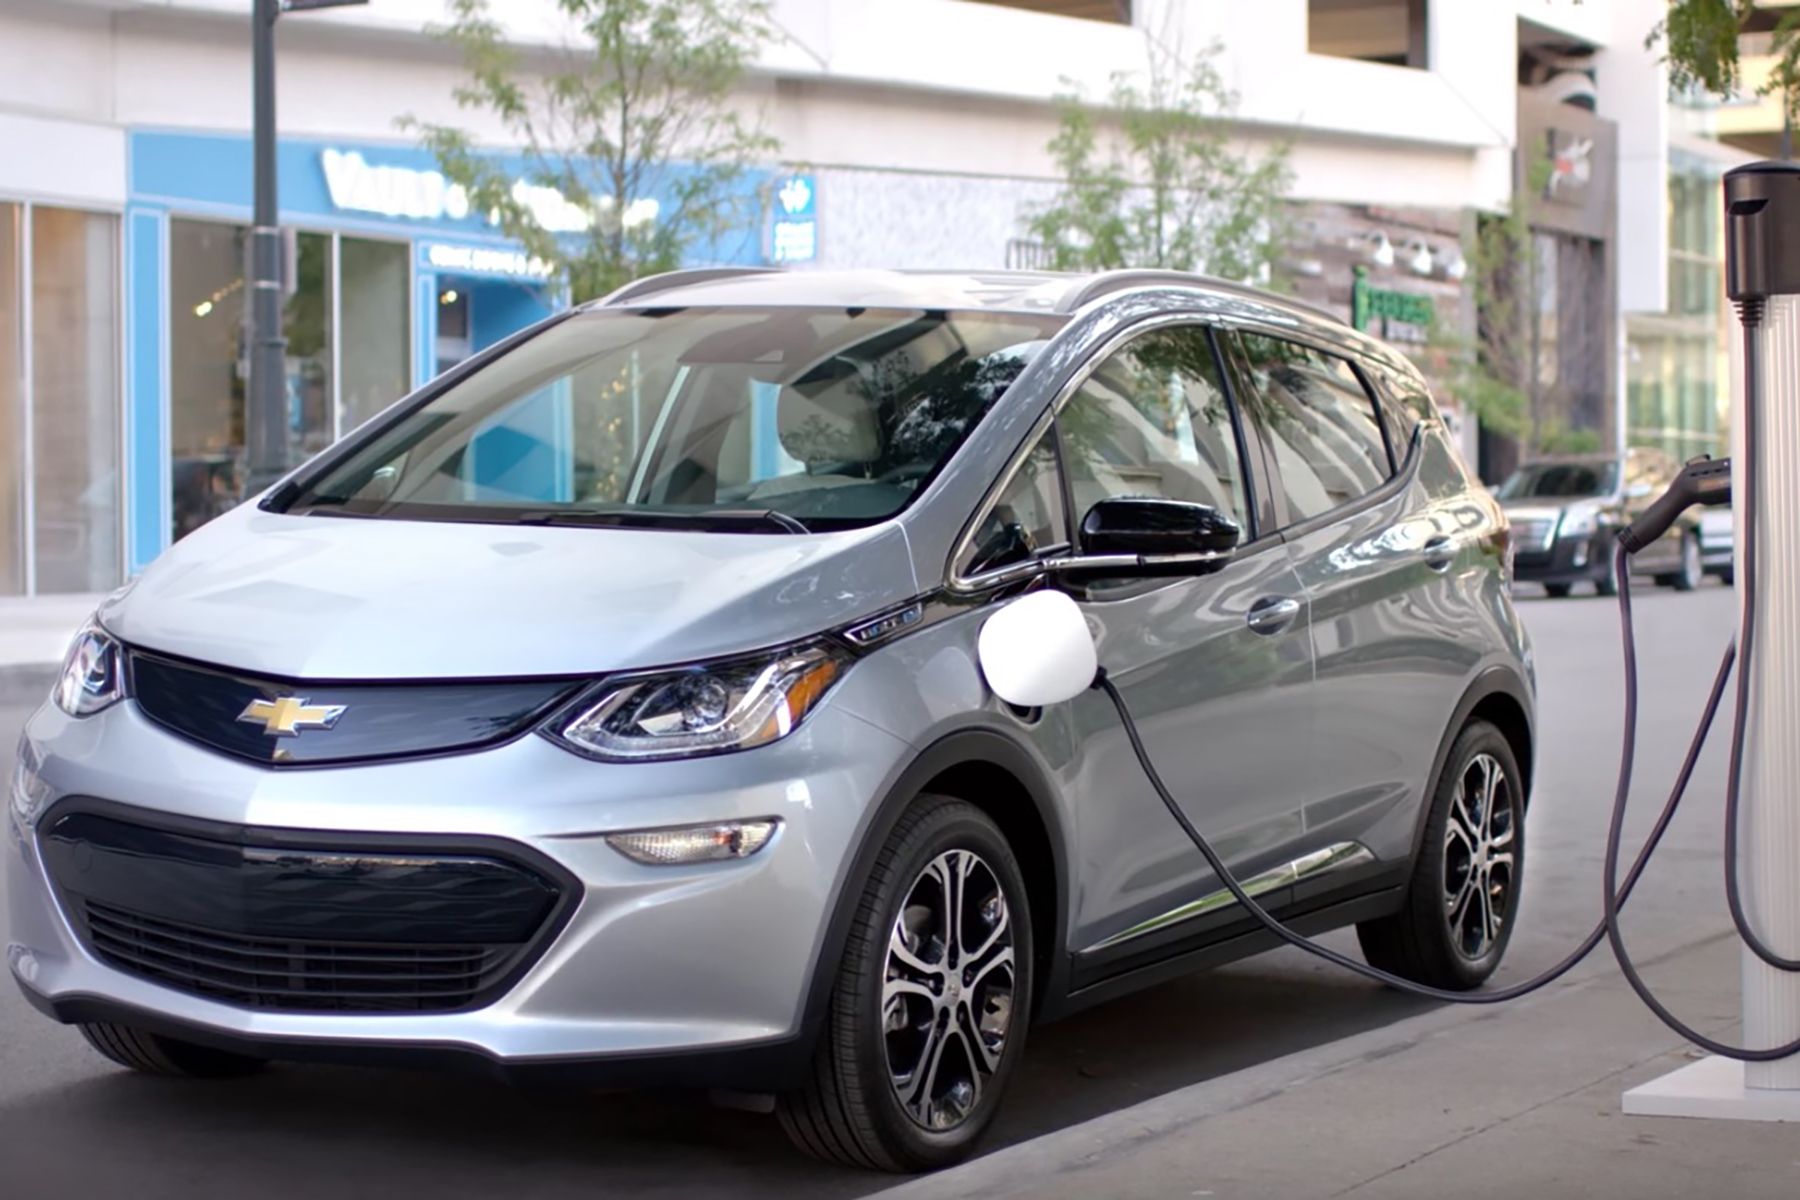 Chevy Bolt EV owners live ‘nightmare’ awaiting batteryfire fix Driving